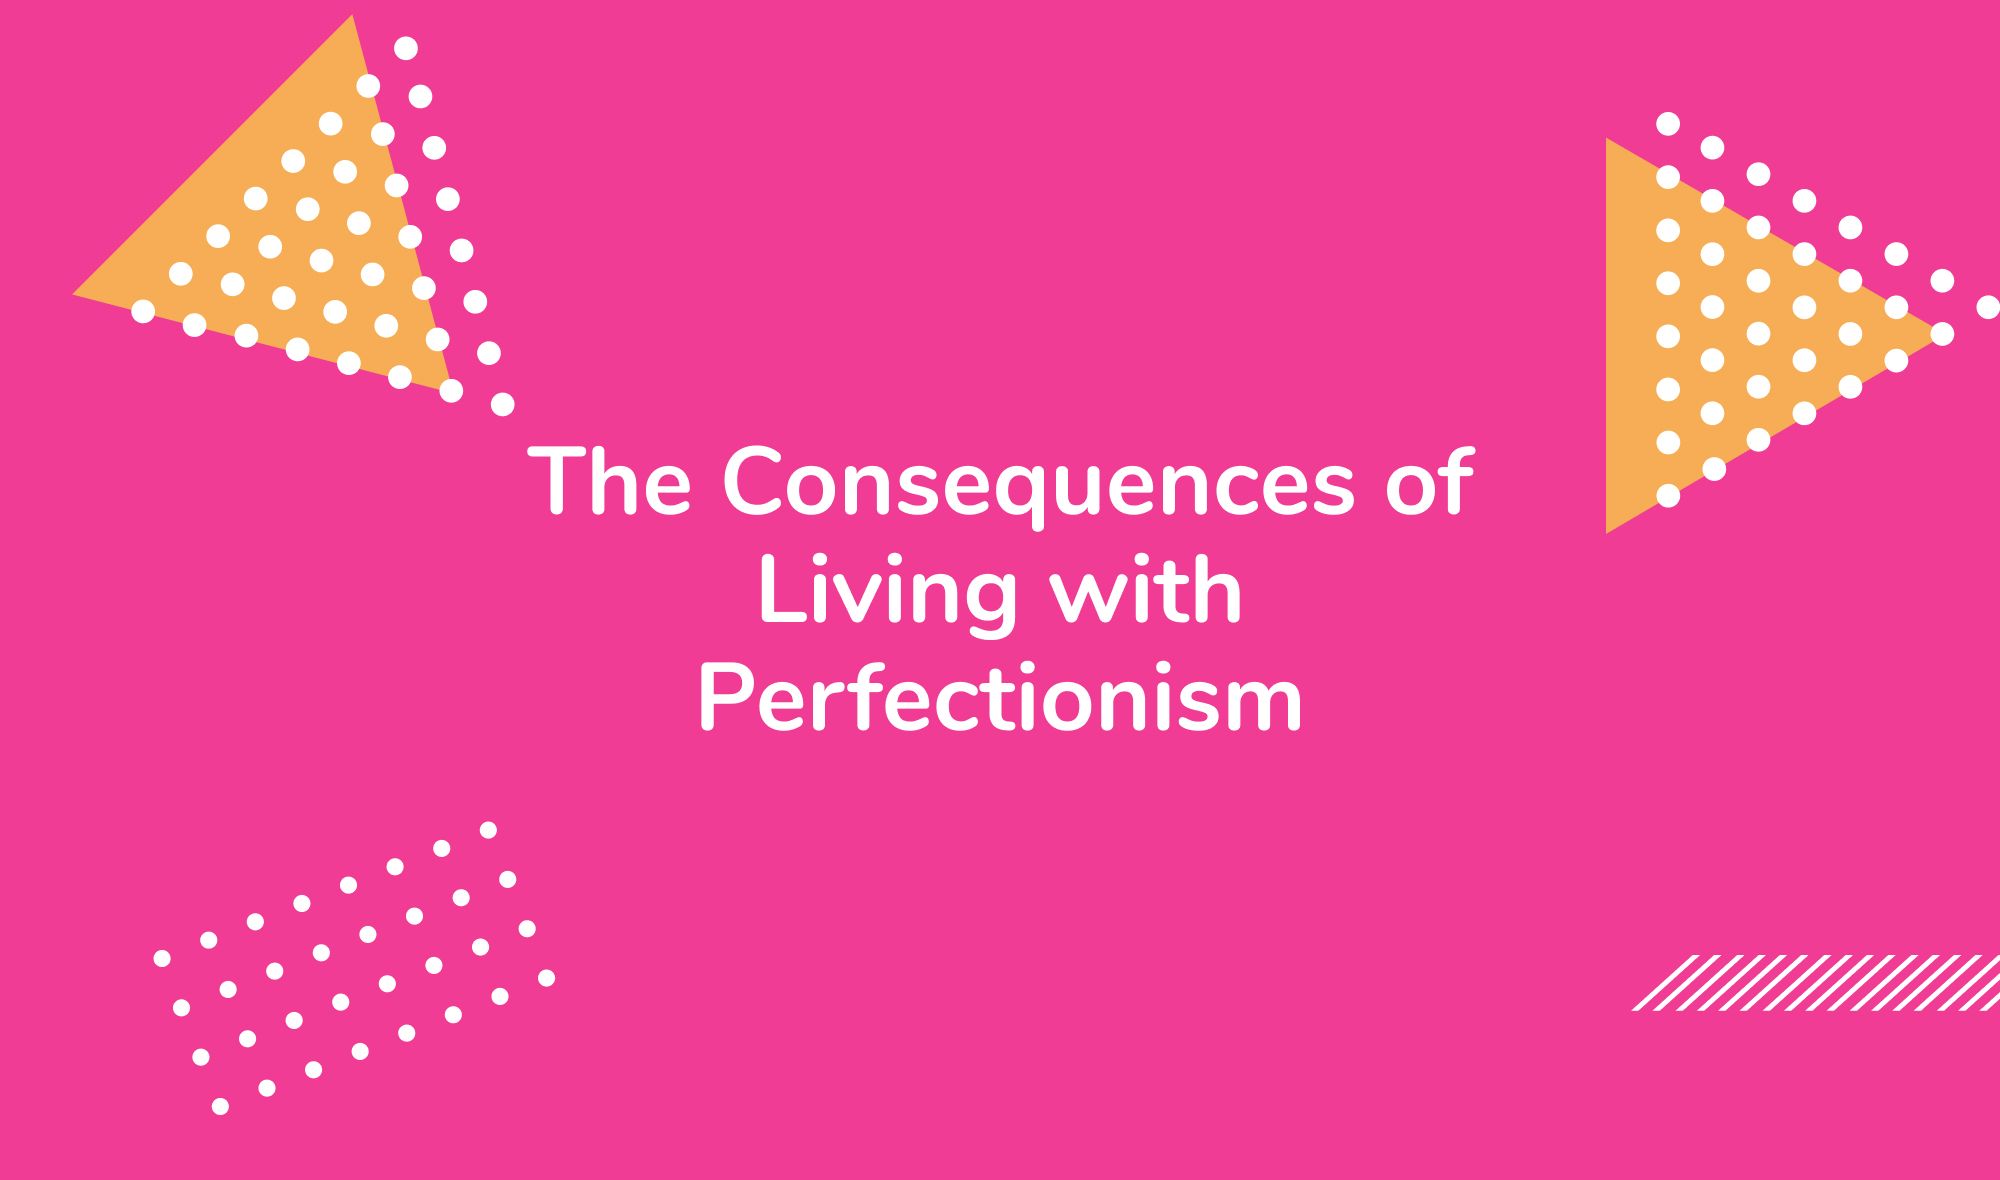 The Consequences of Living with Perfectionism